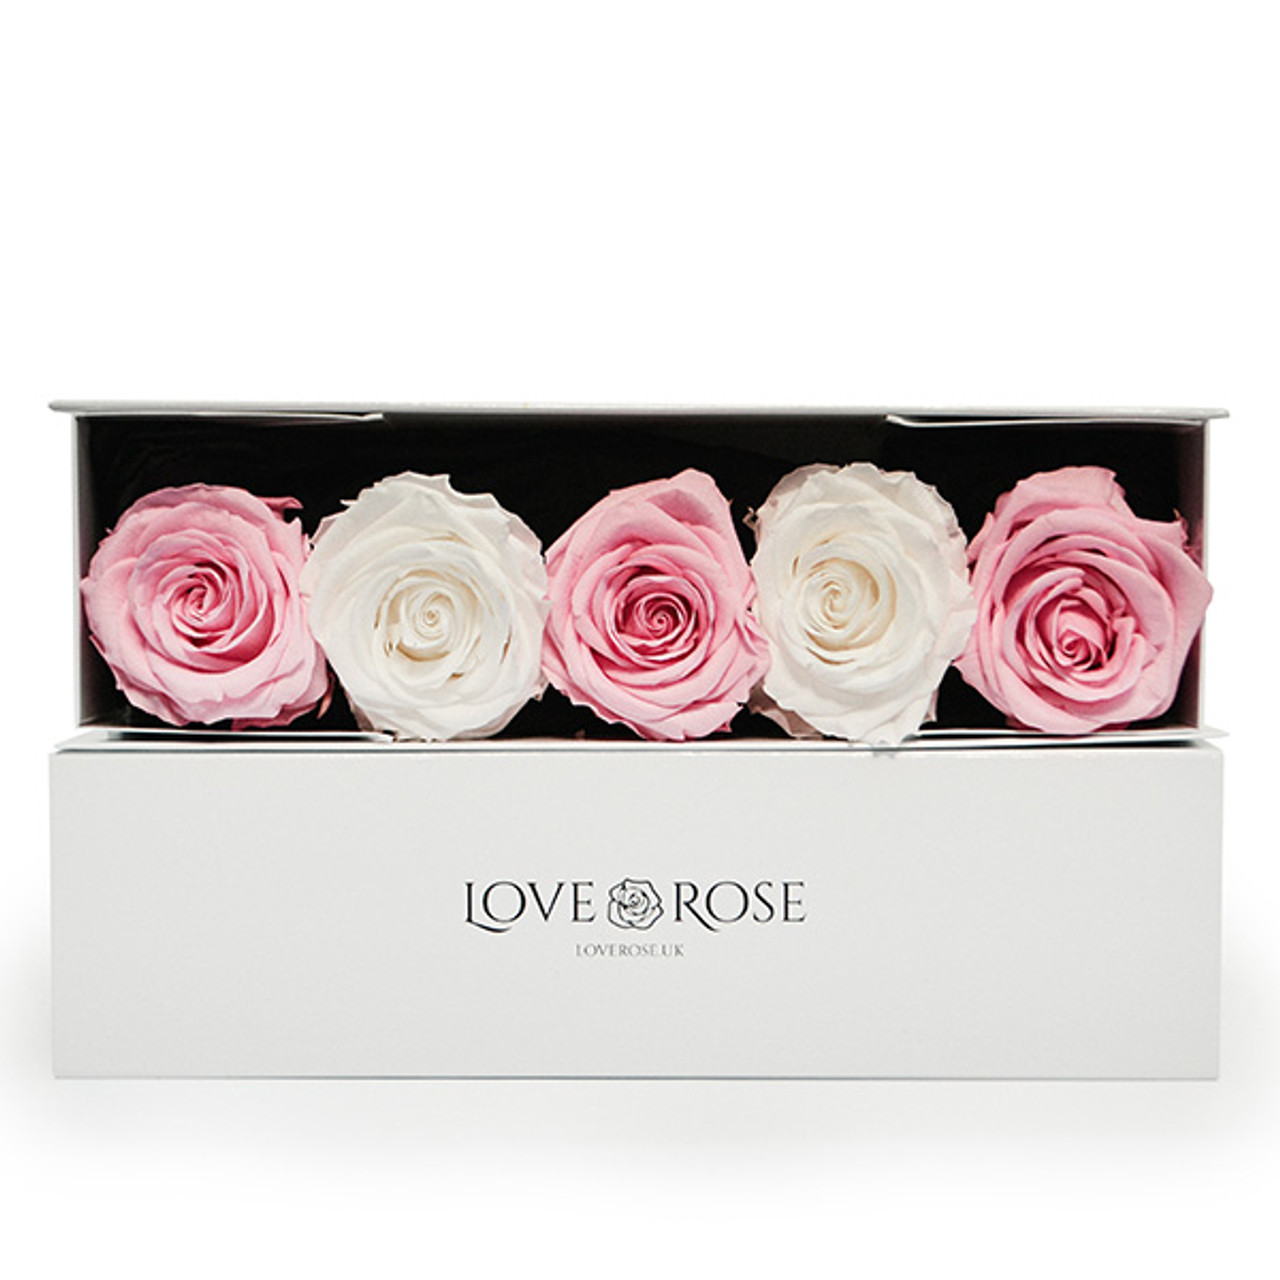 A box of pink and white luxury roses